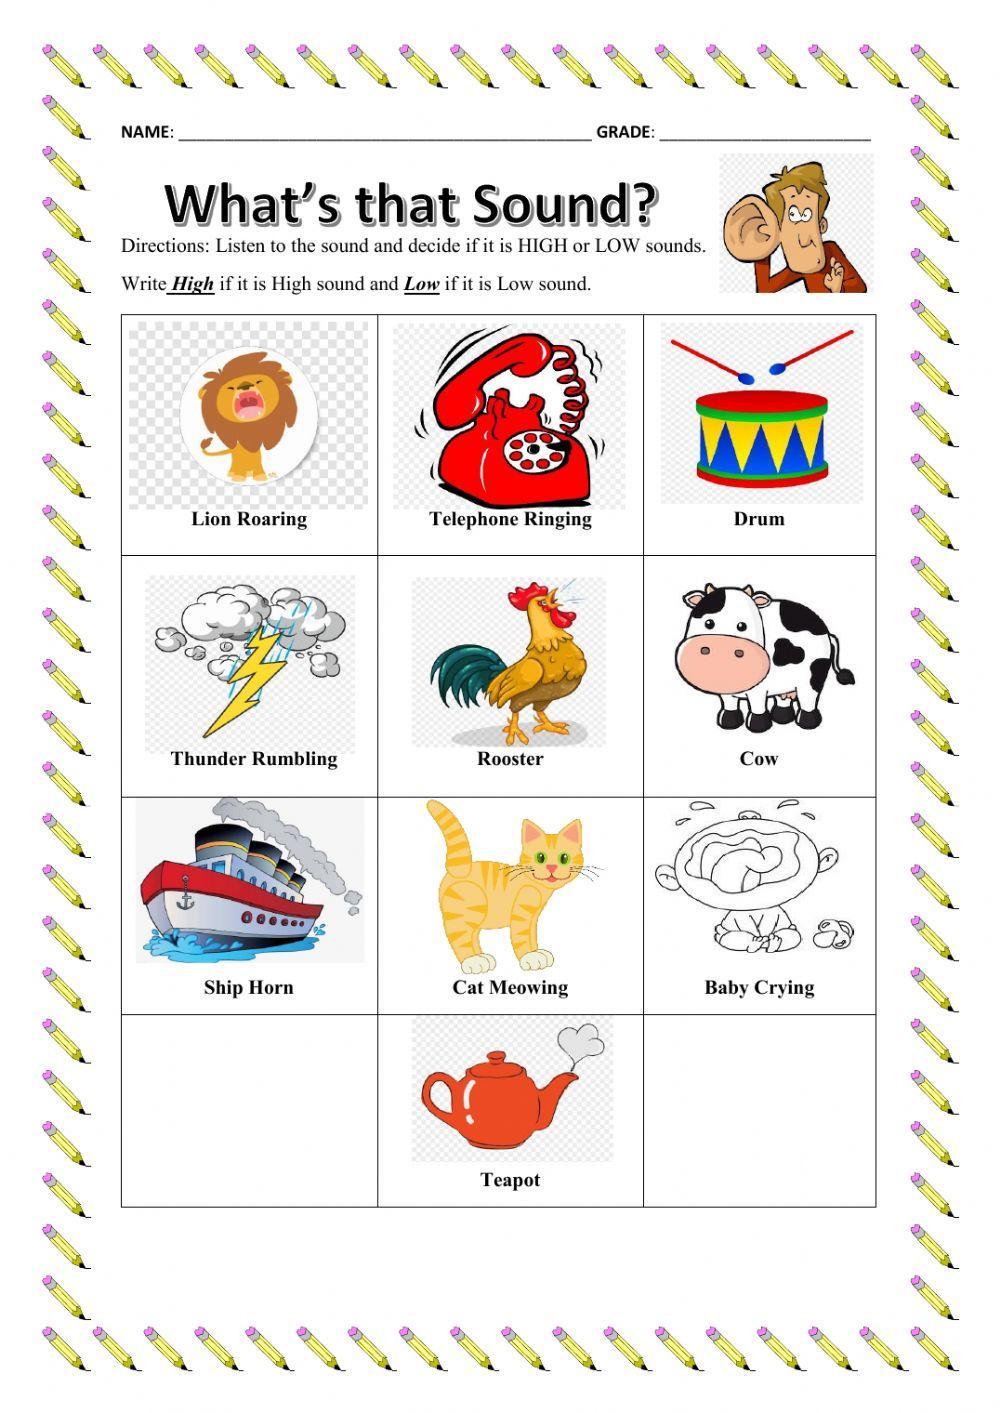 PITCH - HIGH and LOW Sounds interactive worksheet